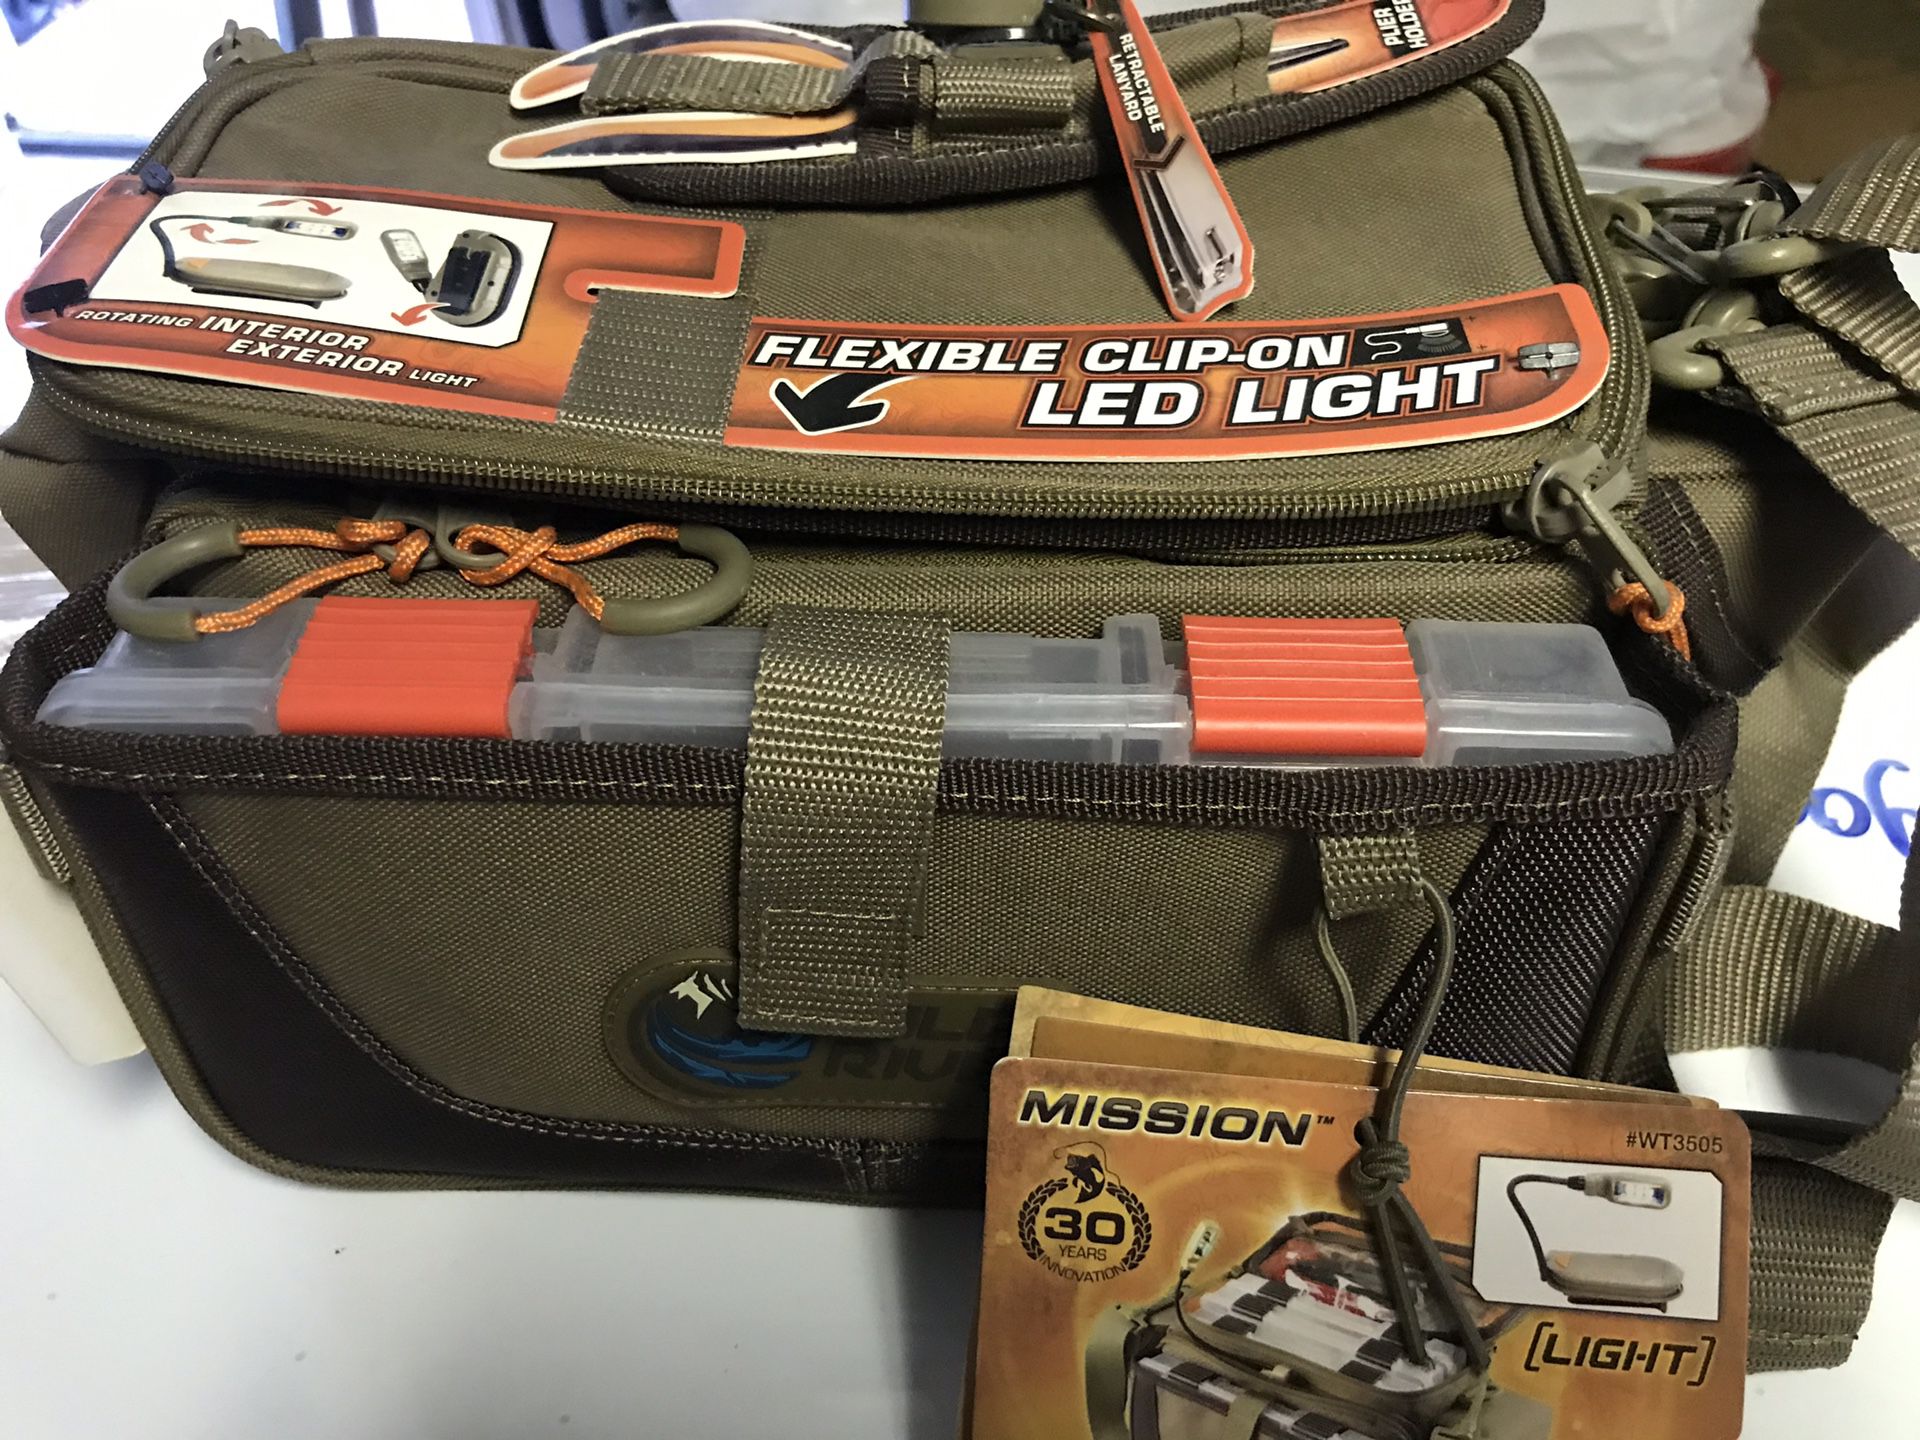 Wild River Mission Fishing Tackle Bag